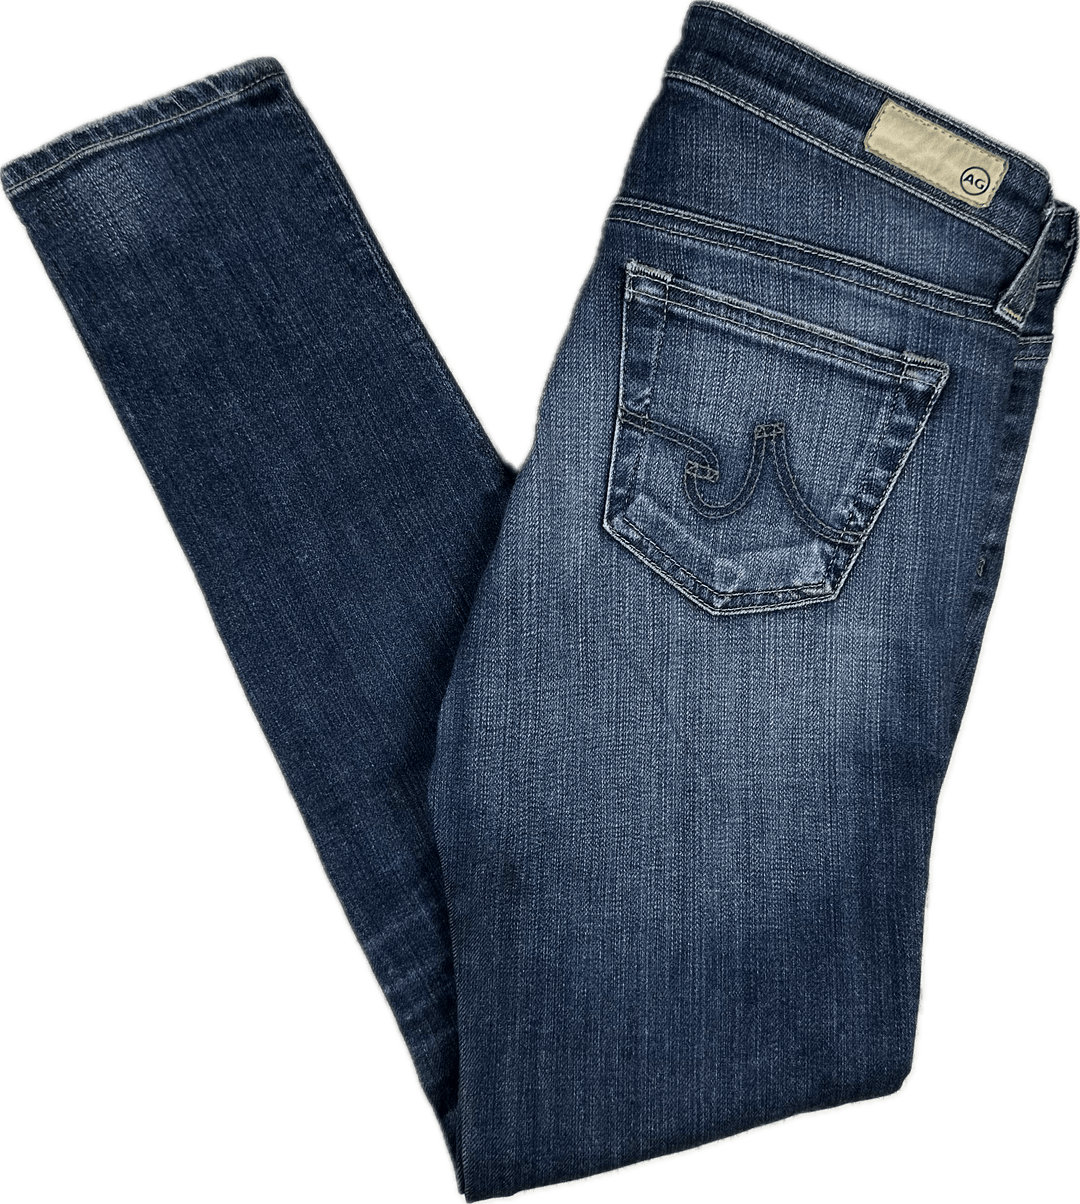 AG Adriano Goldschmied 'The Legging Ankle' Super Skinny Jeans- Size 25R - Jean Pool